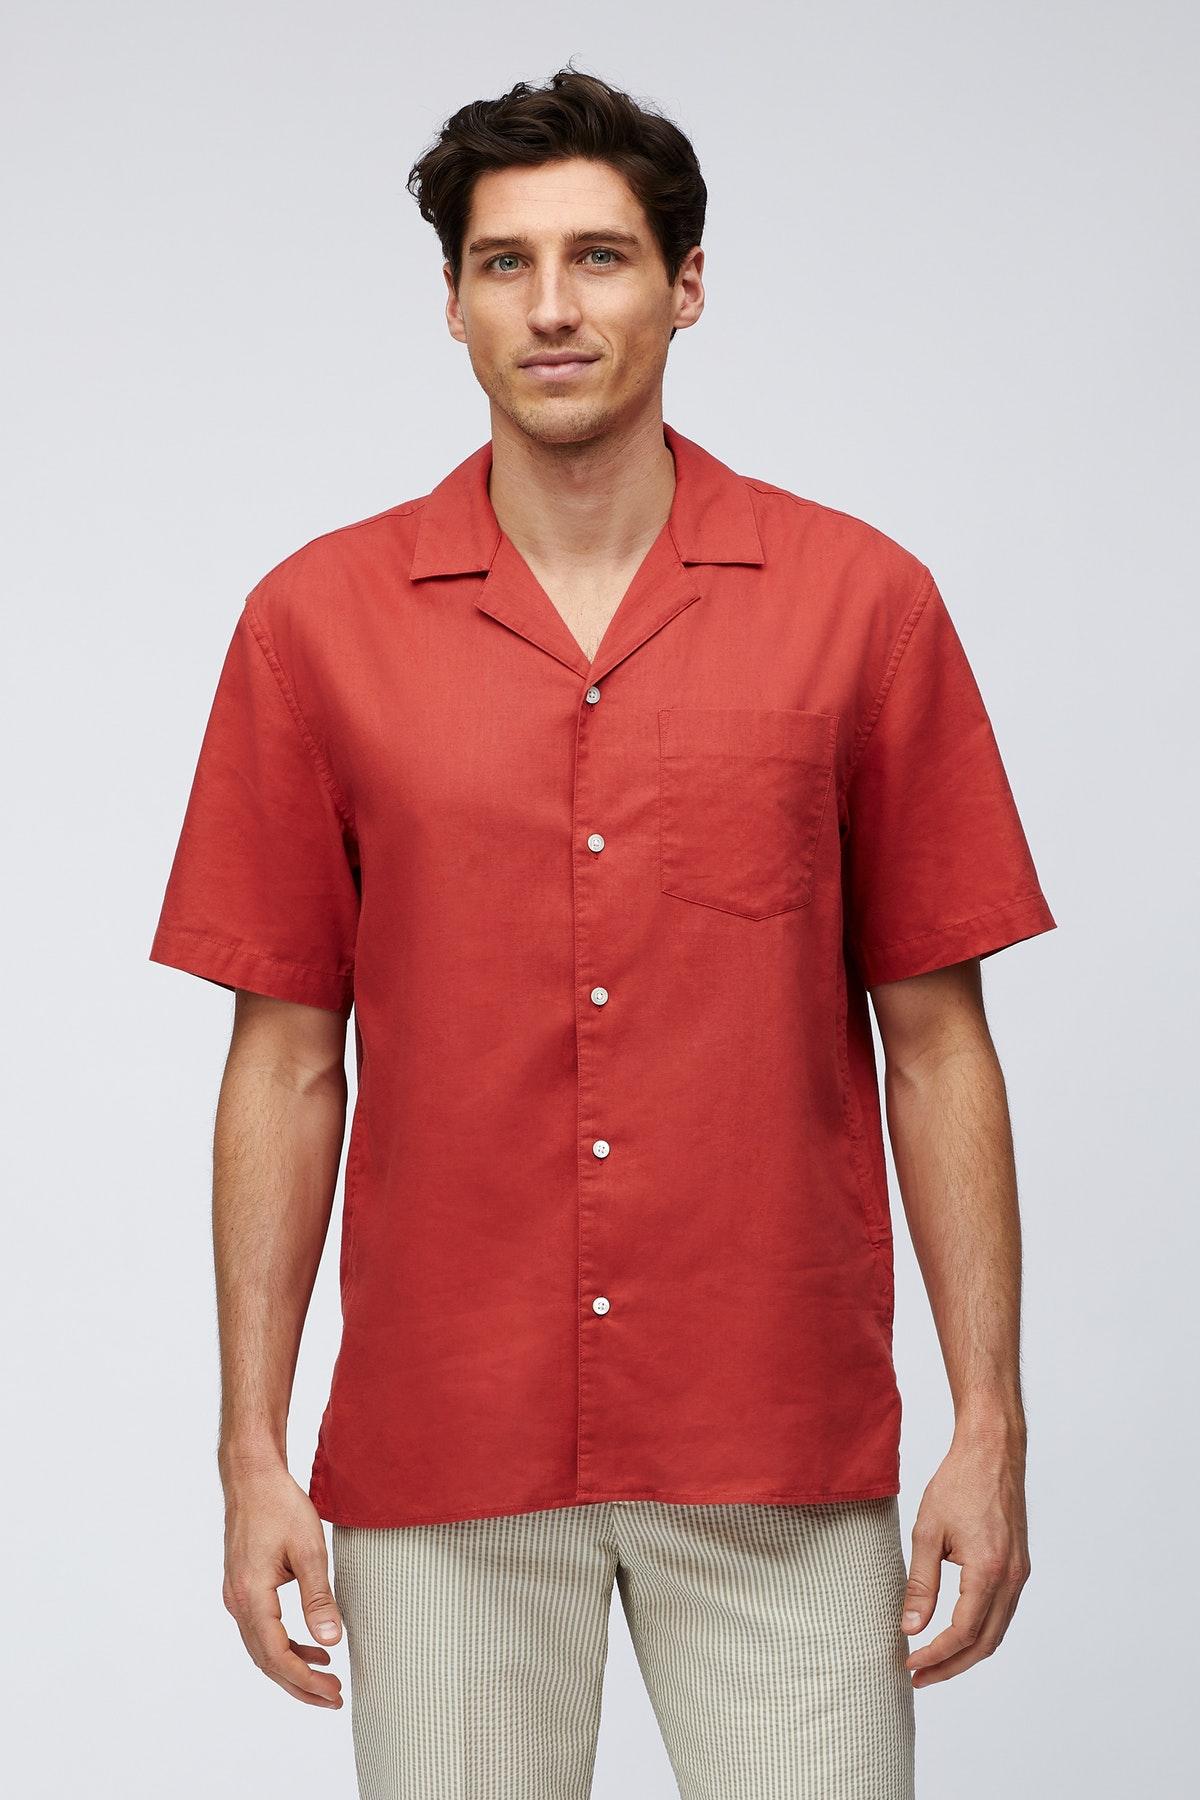 Bonobos Cotton Relaxed Fit Camp Collar Shirt in Red for Men - Lyst